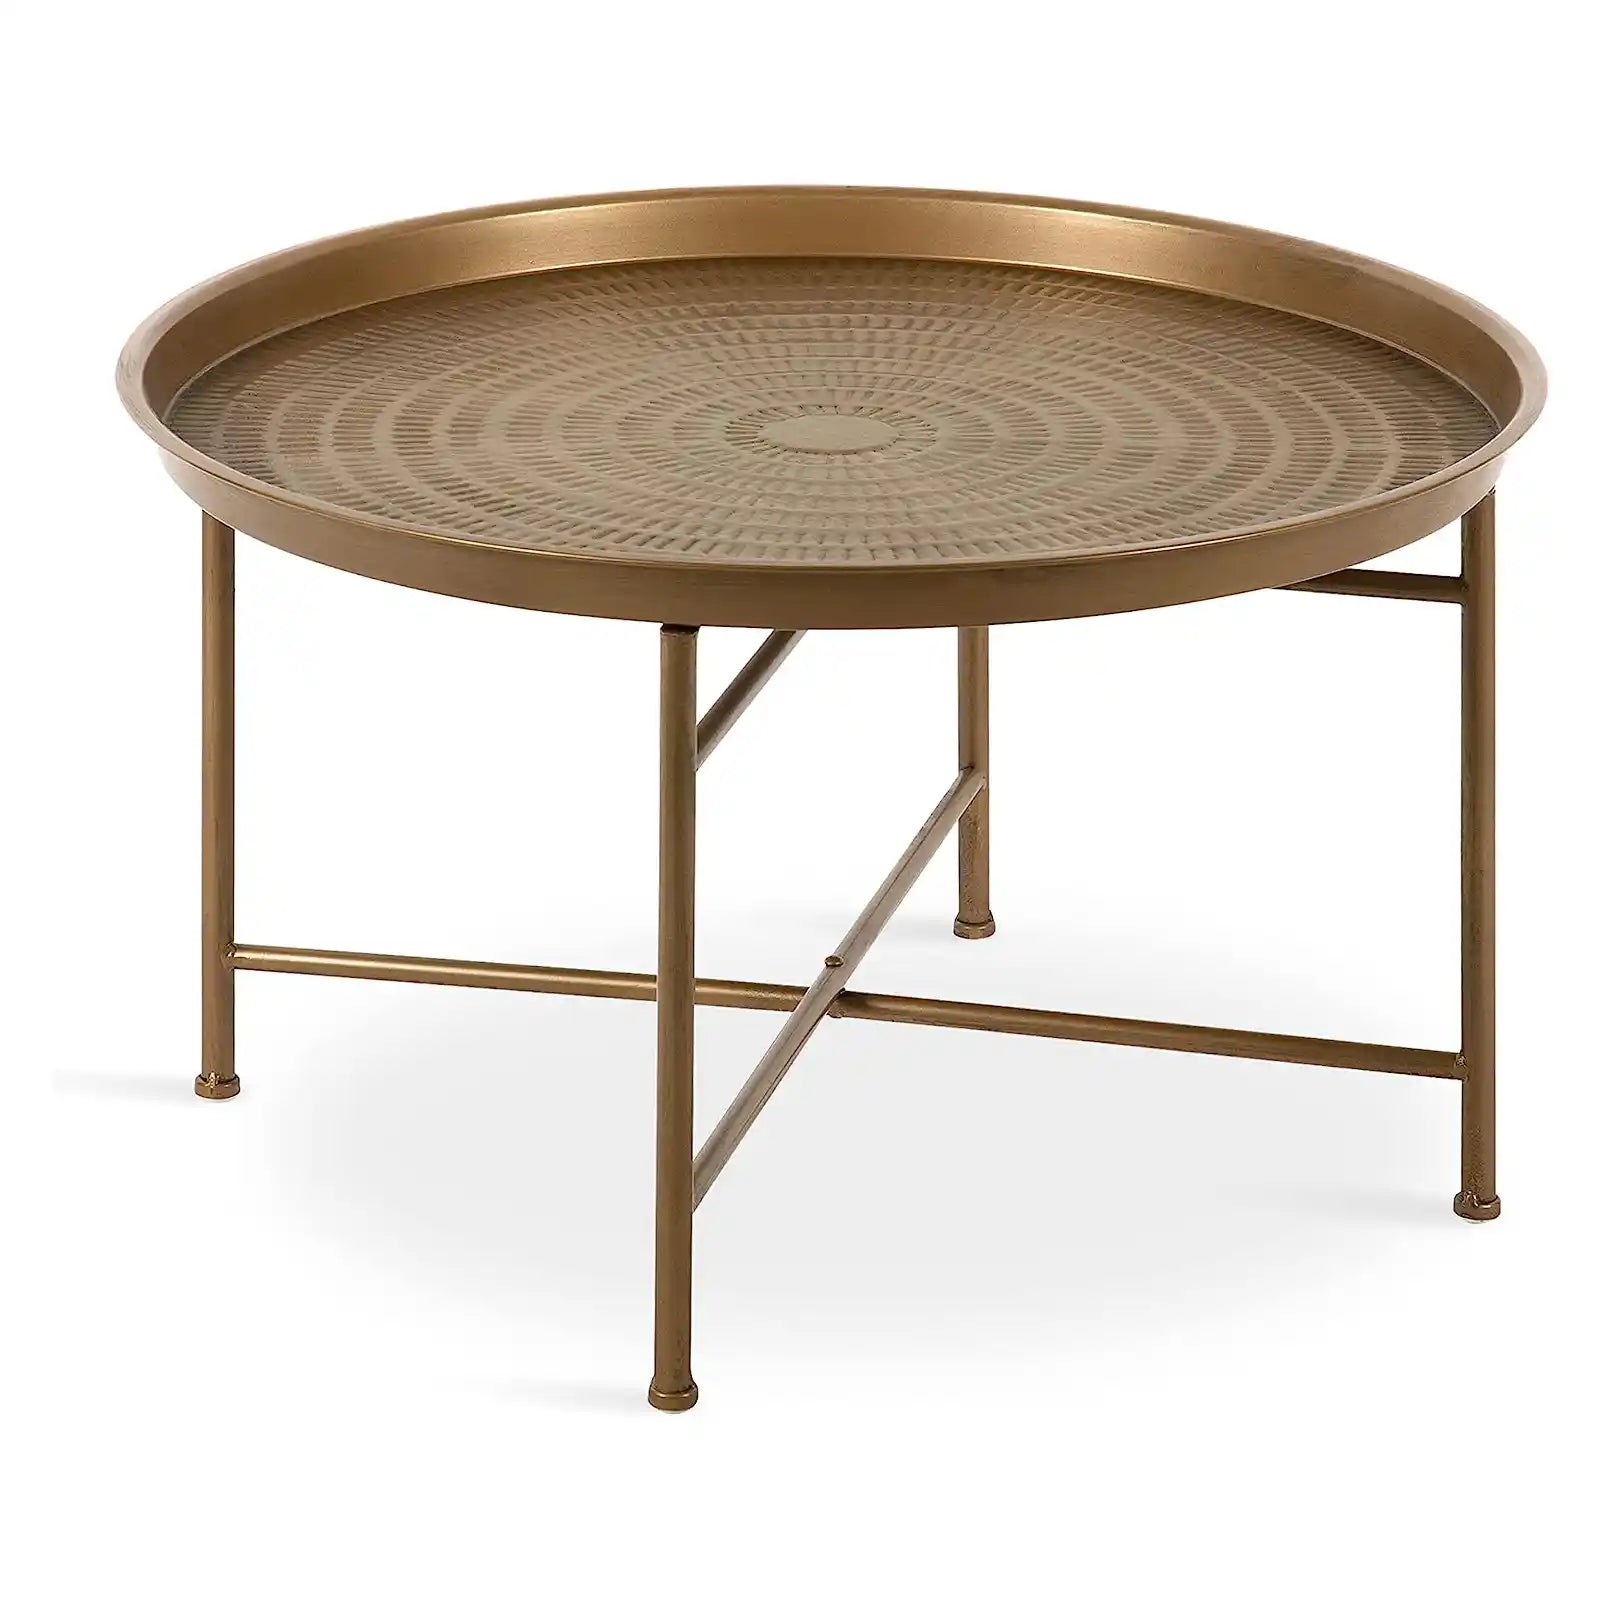 Retro Round Coffee Table, Boho-Chic Hammered Metal Tray Coffee Table